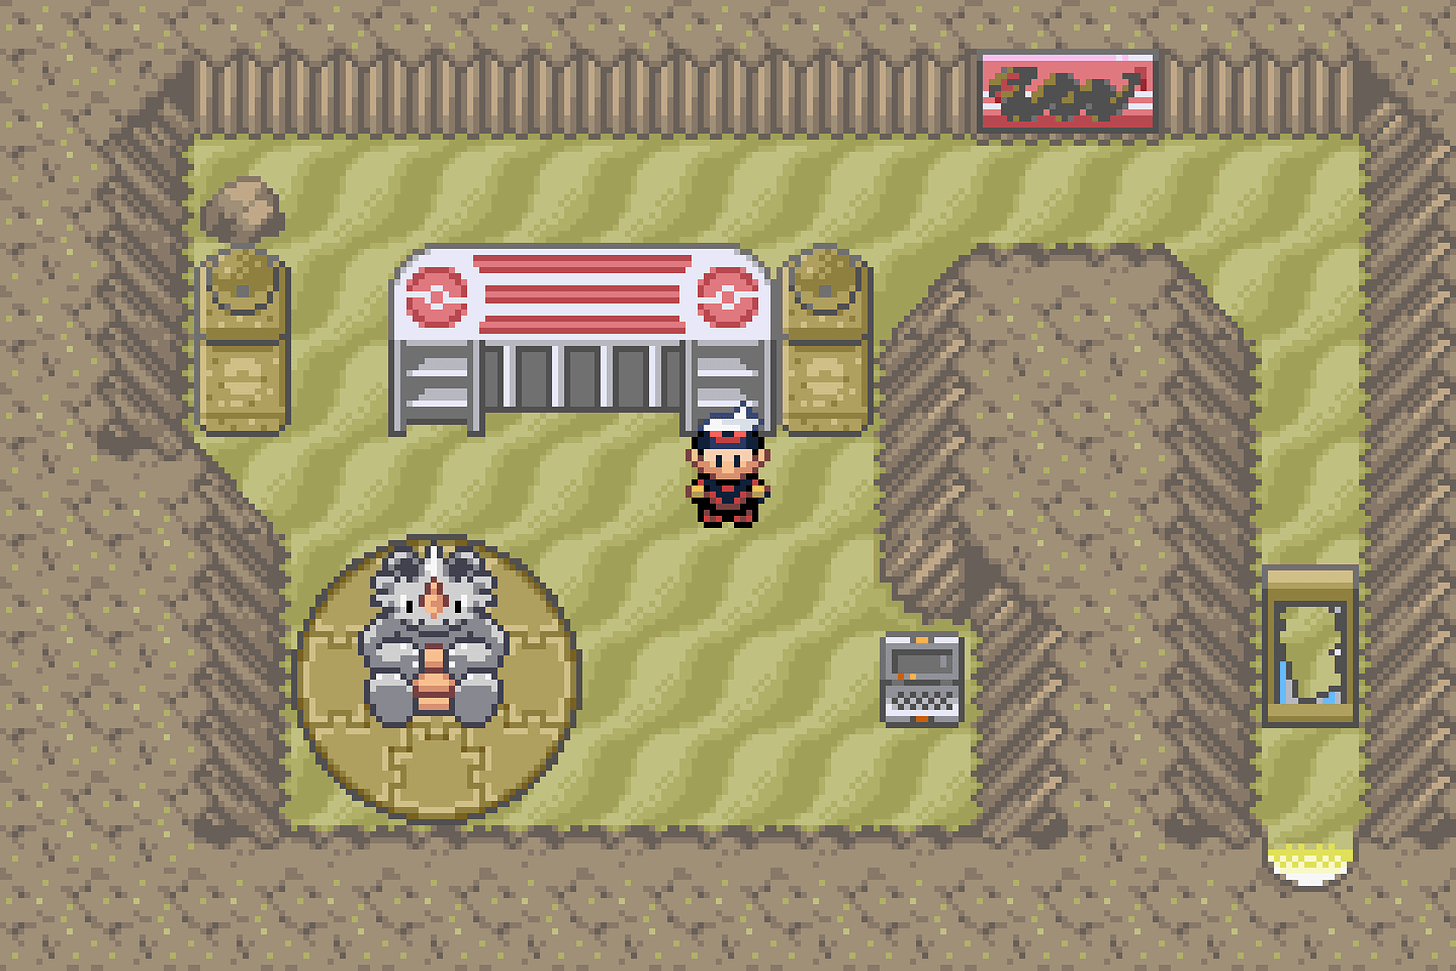 My original secret base, extracted from my copy of Pokémon Ruby cartridge, dating back to around 2003